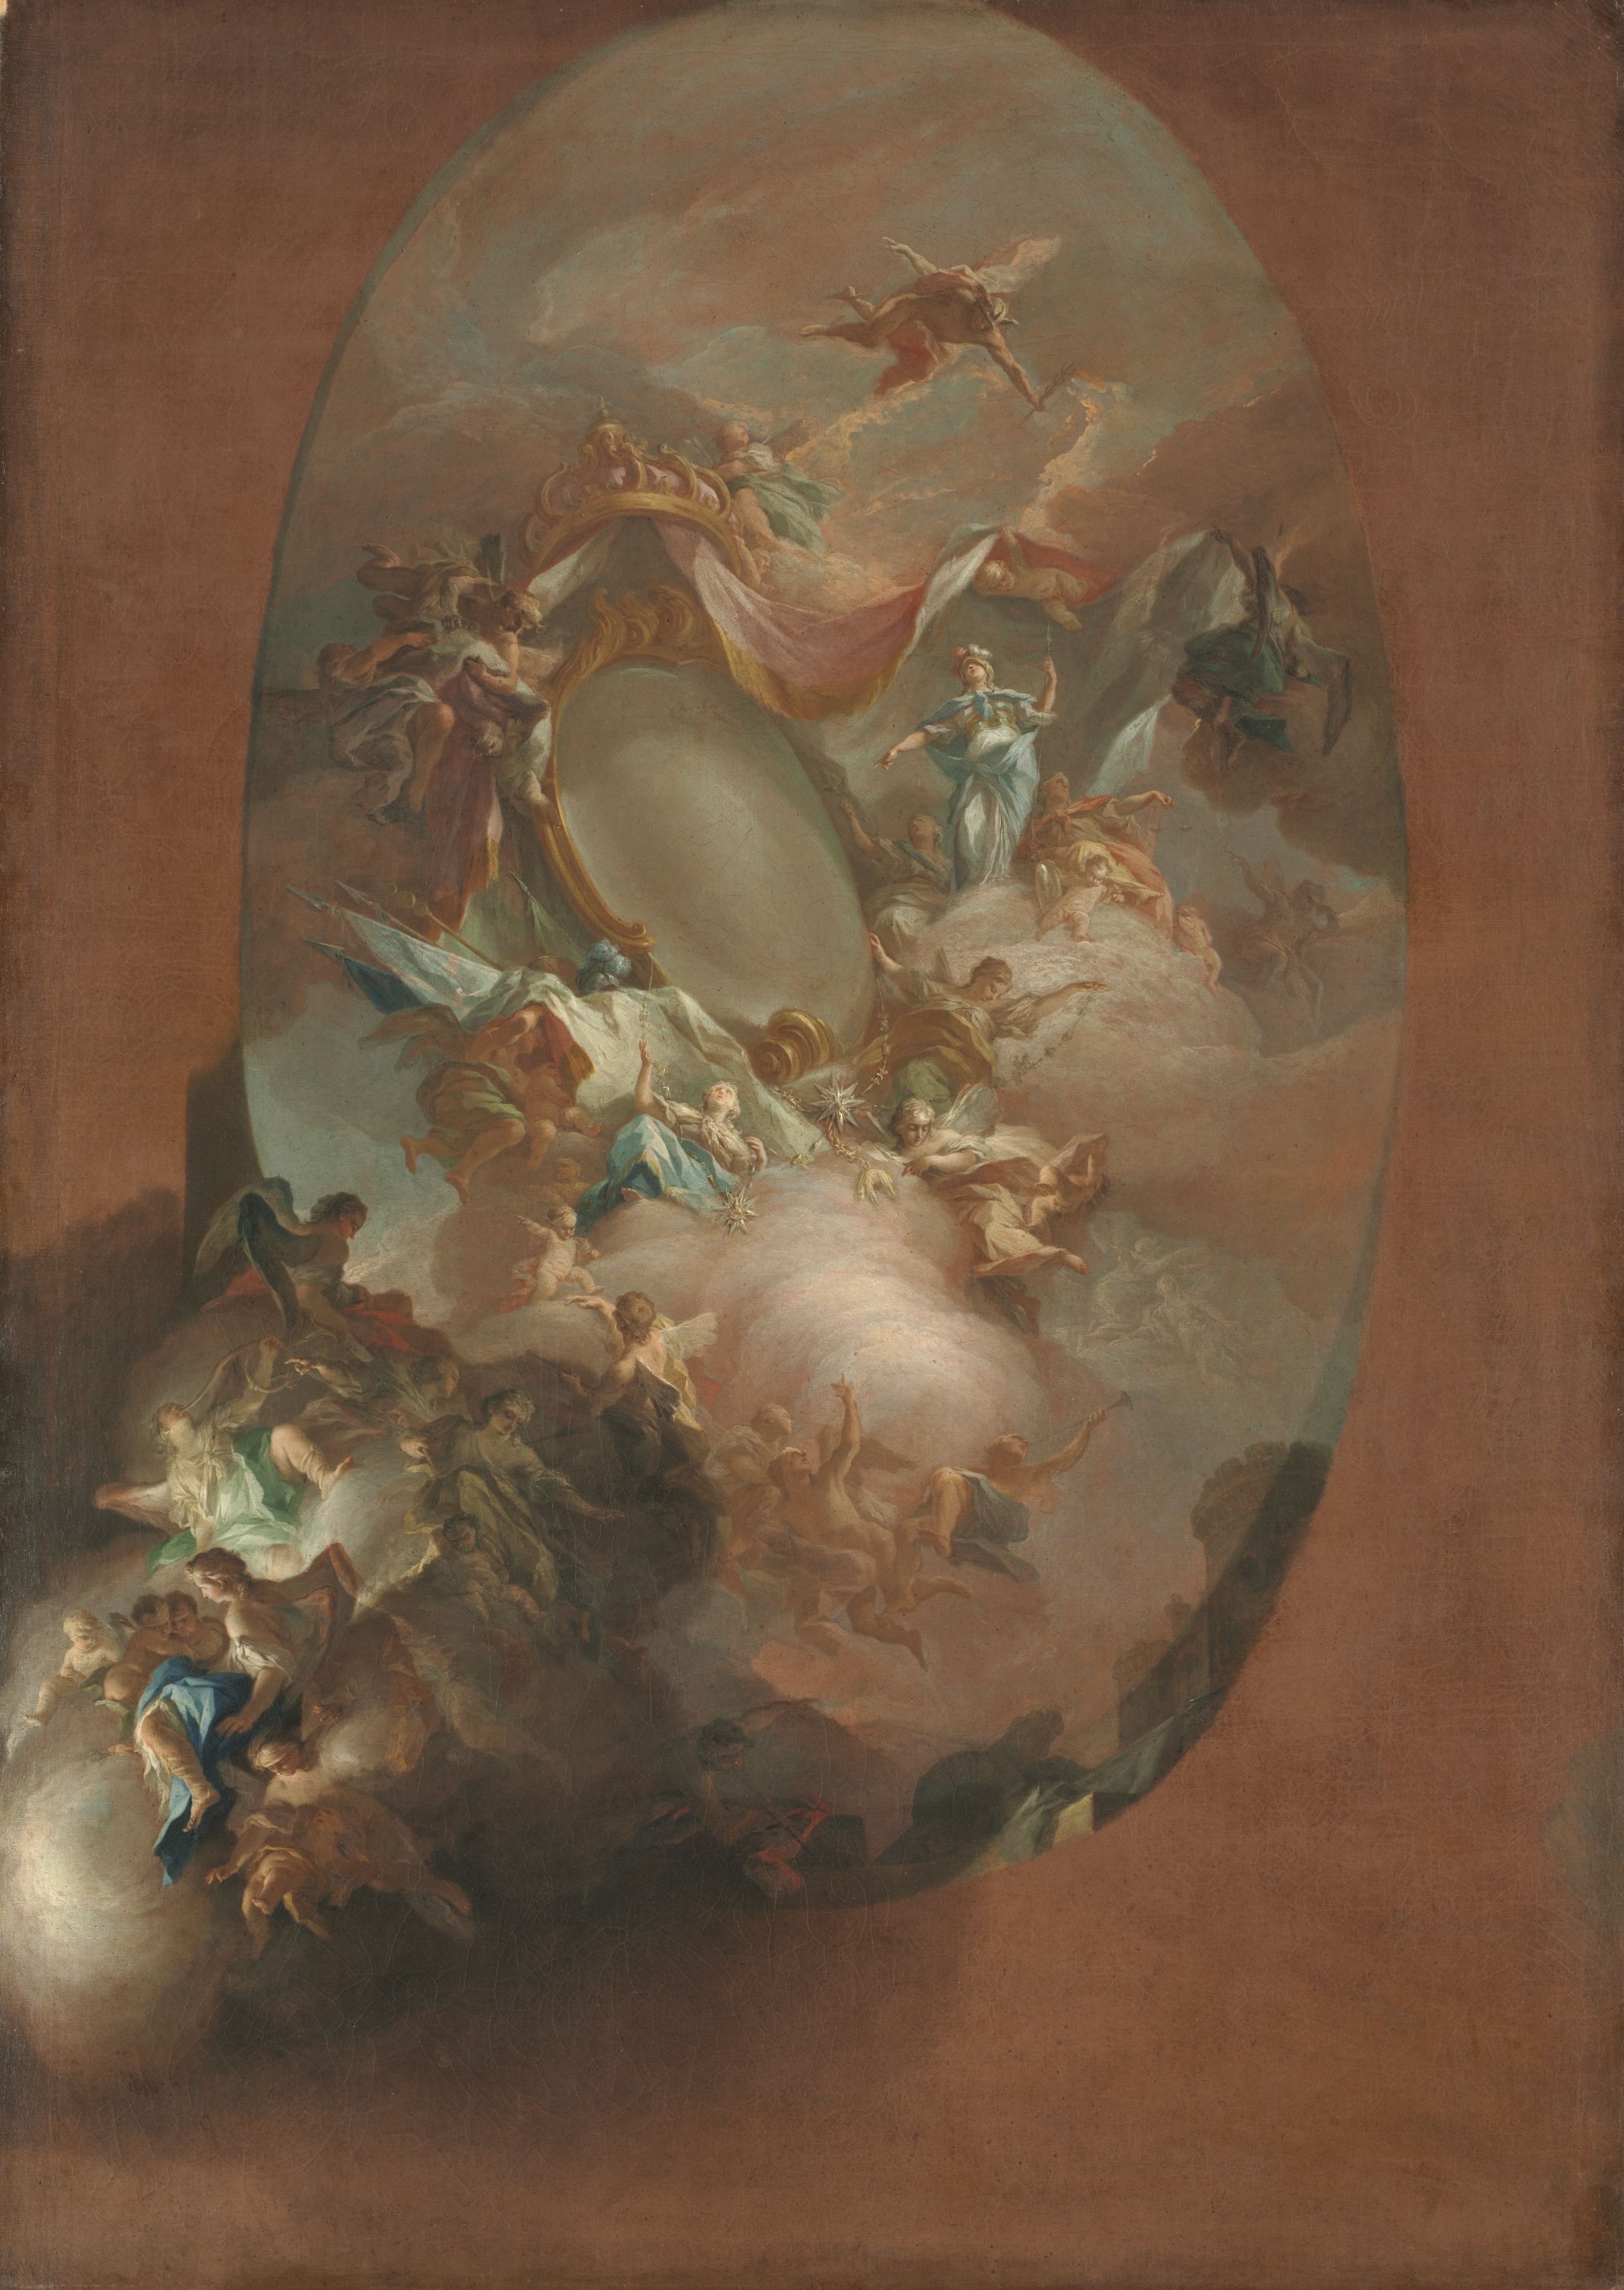 Study for "The Apotheosis of Ferdinand IV and Maria Carolina, King and Queen of Naples" (for the Palazzo dei Regi Studi, Naples)